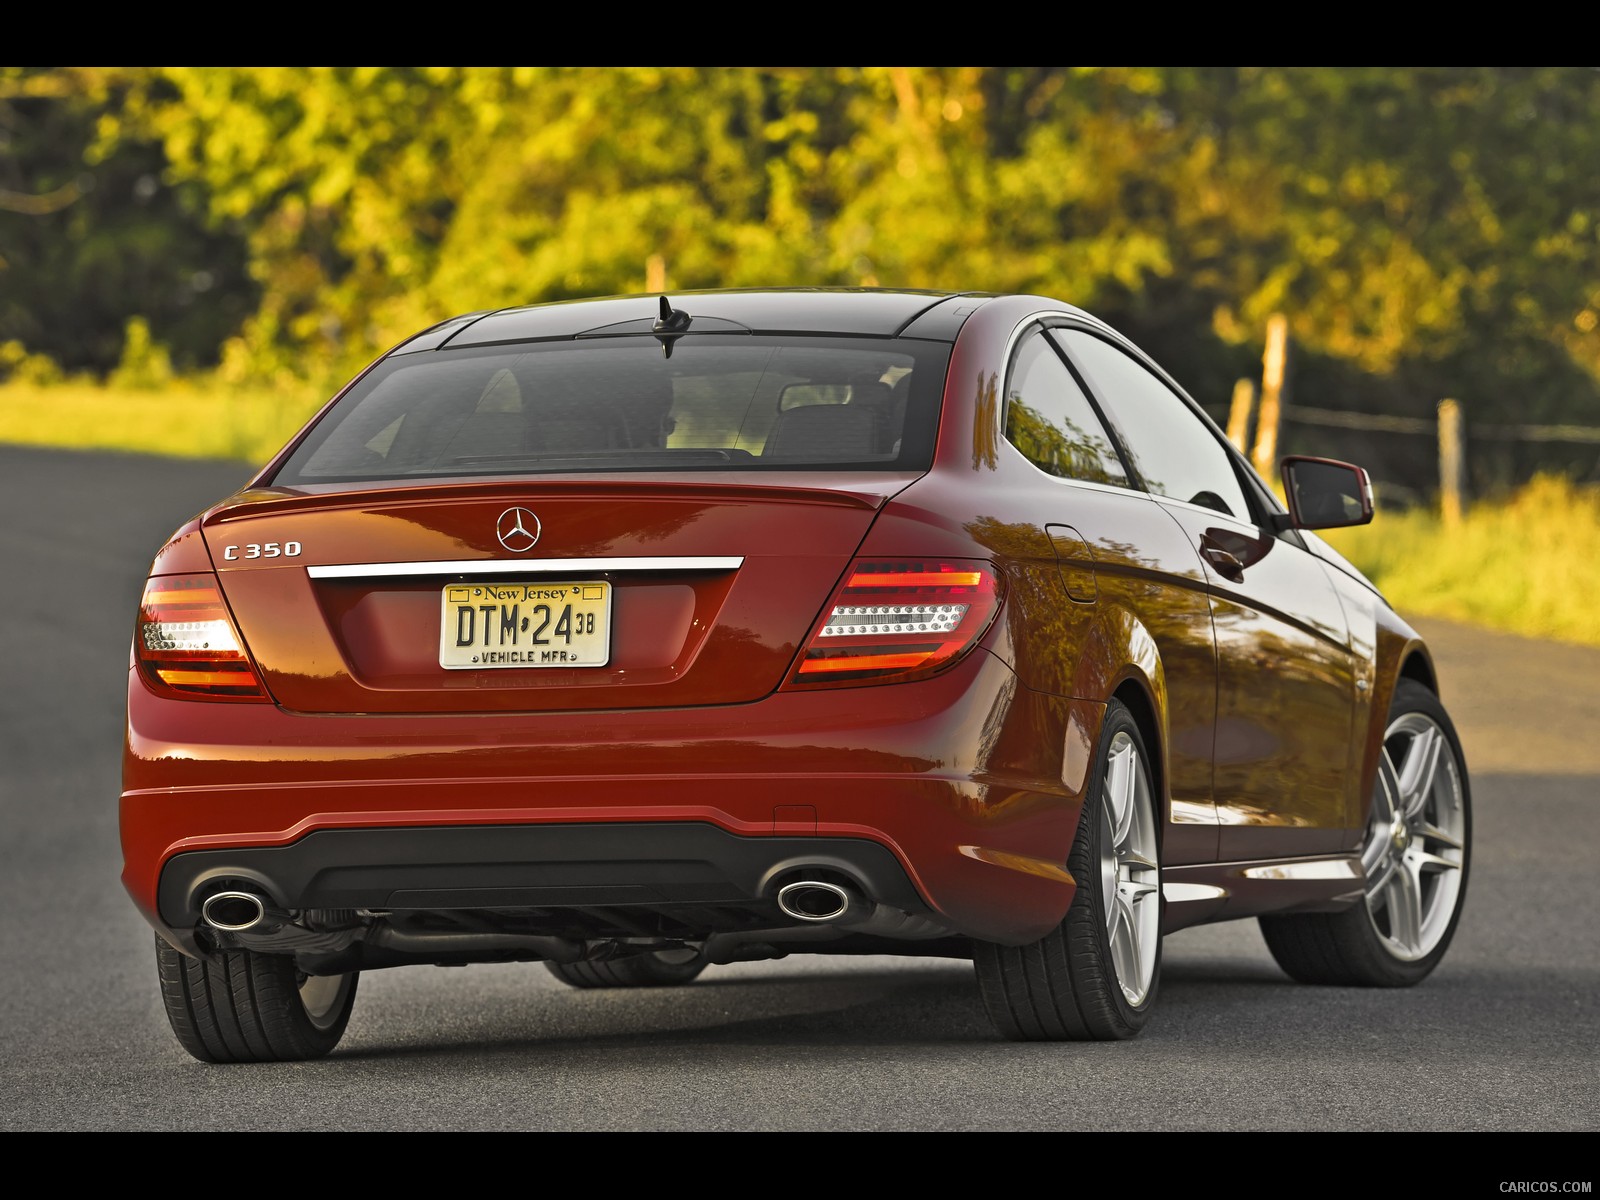 Mercedes-Benz C-Class Coupe (2012) C350  - Rear , #62 of 79